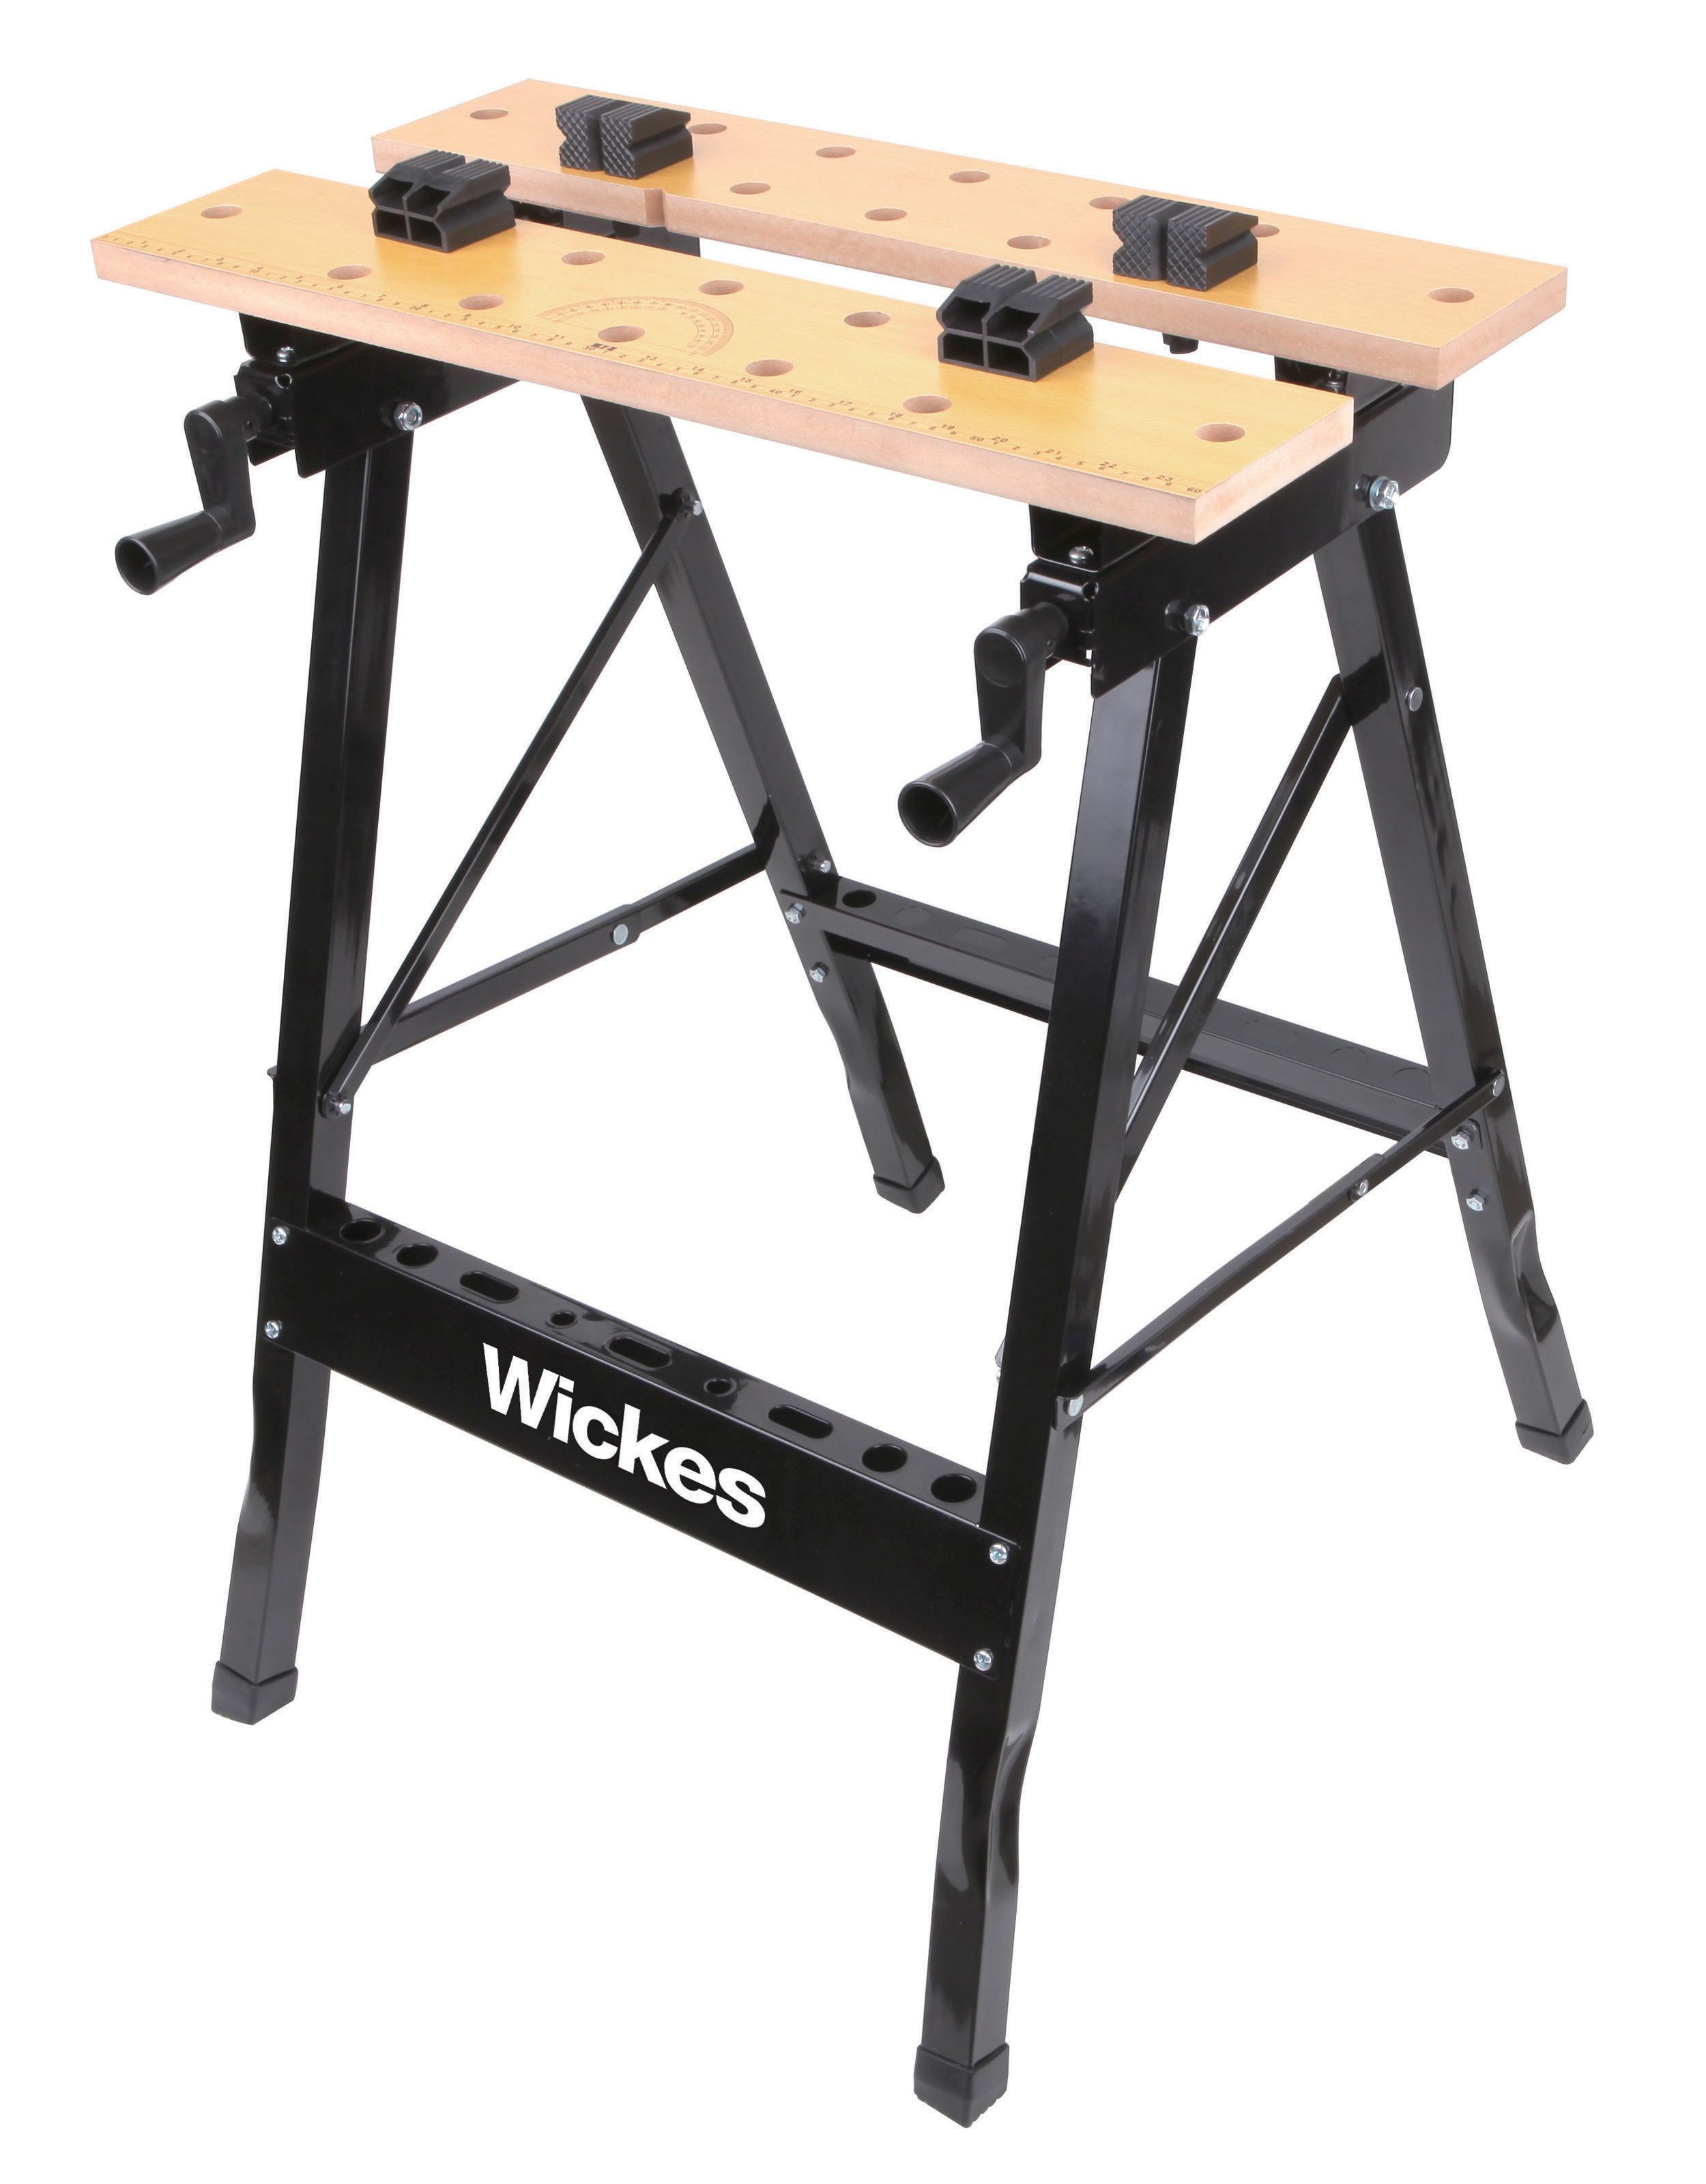 Image of Wickes Fold Down Workbench 605mm